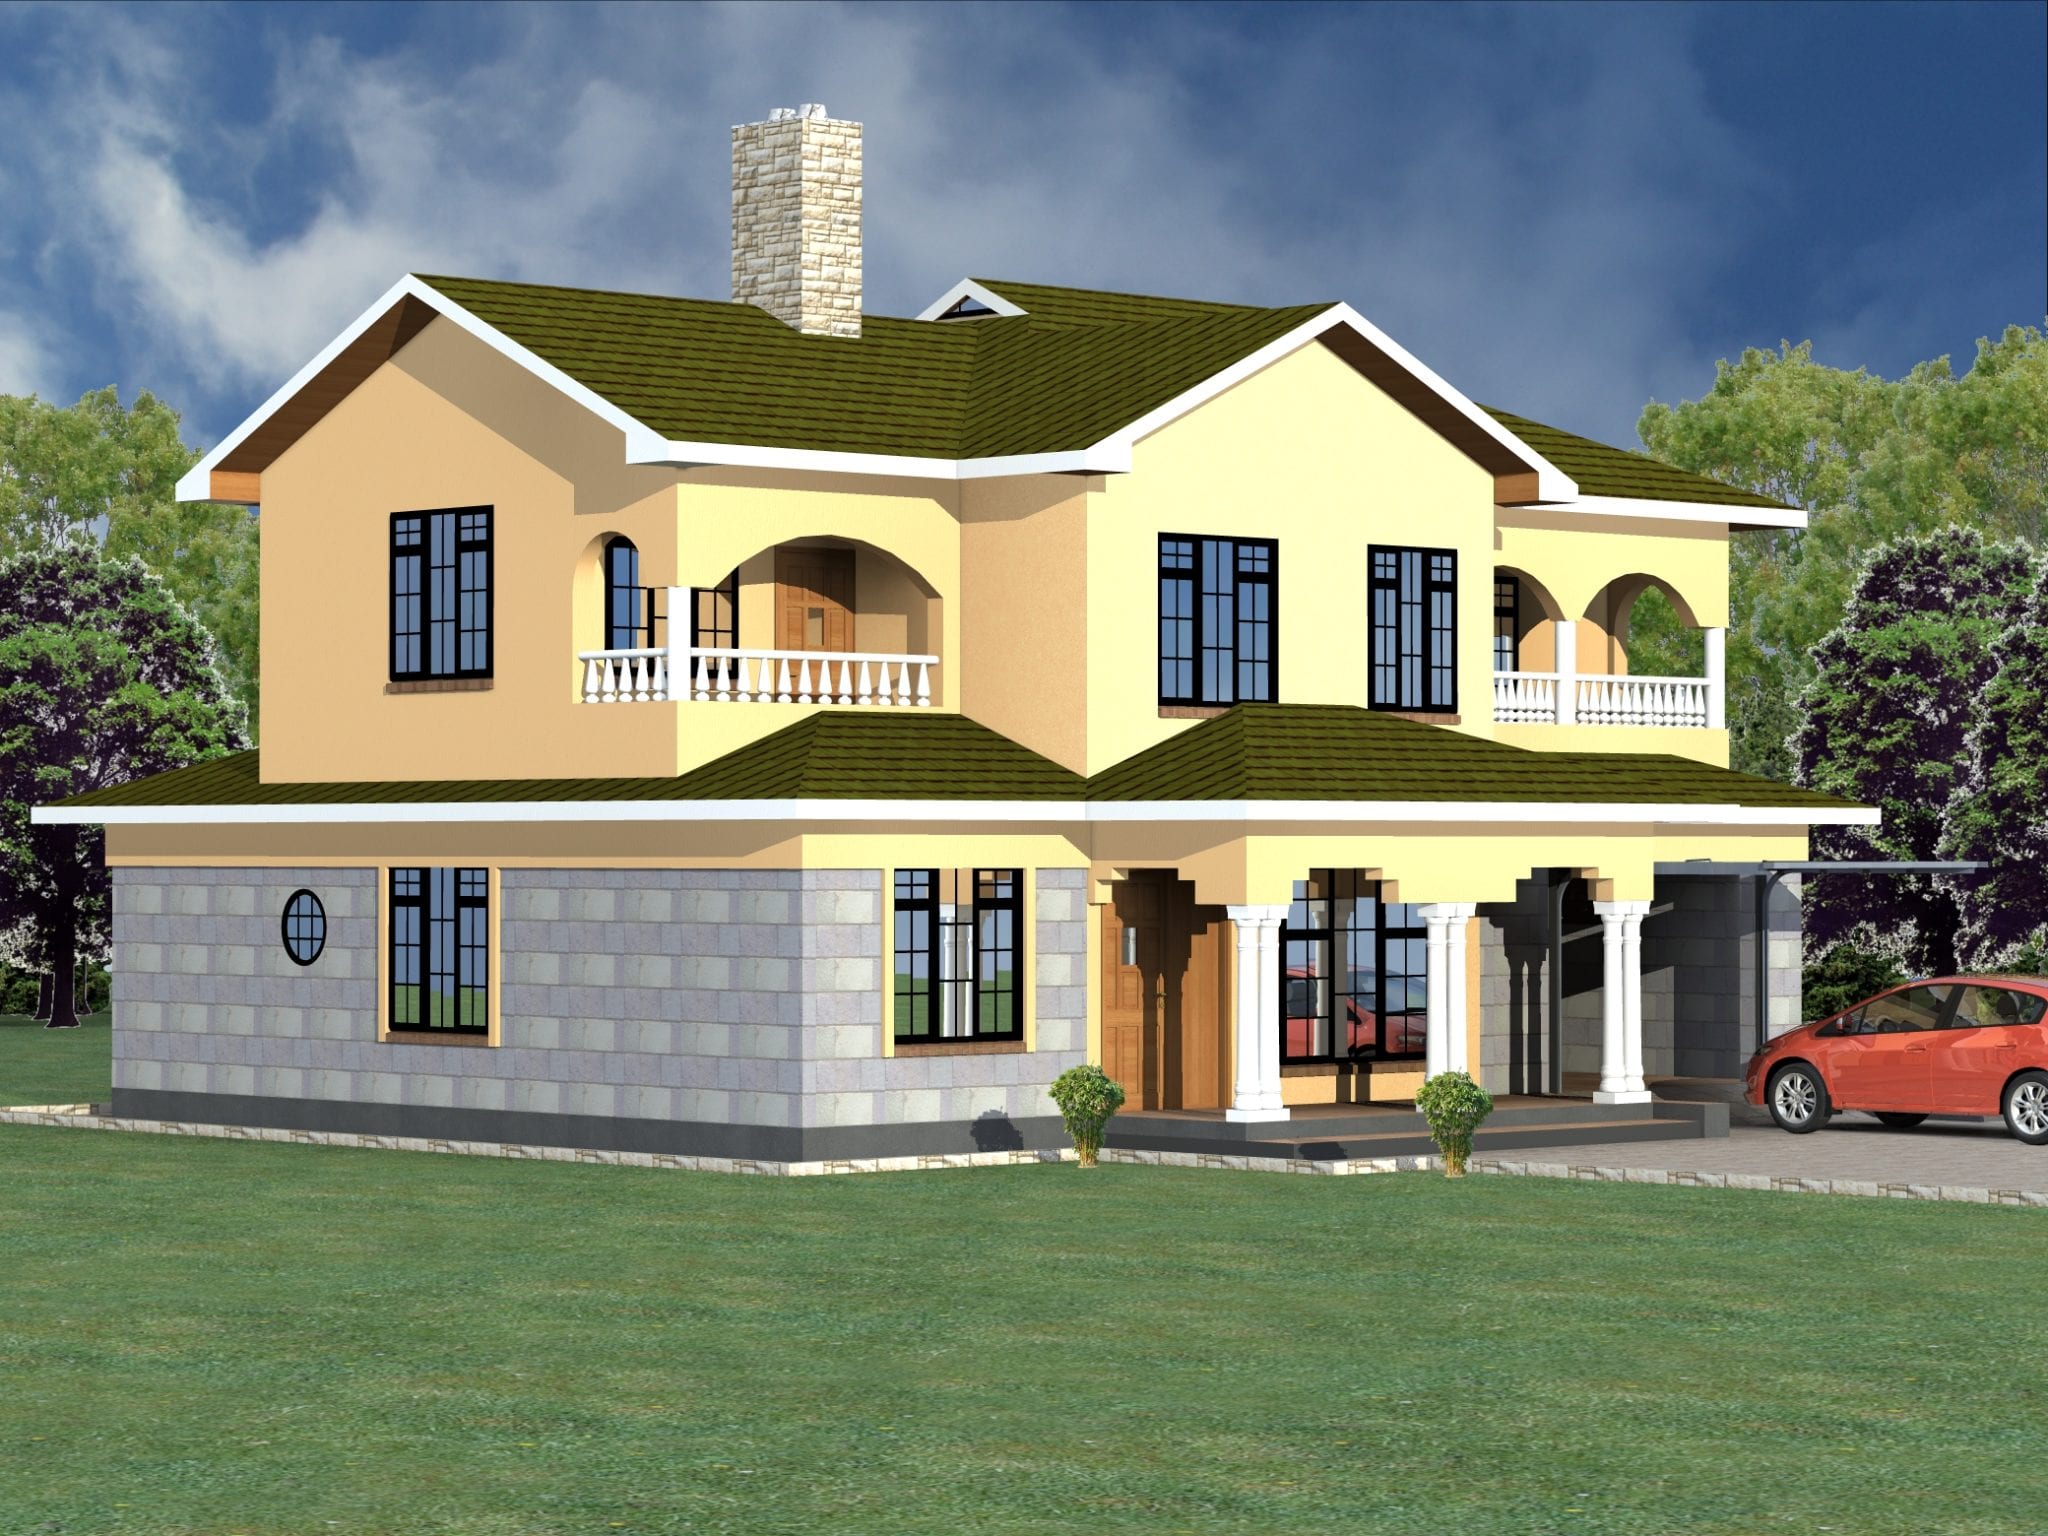  4  Bedroom  2  story  house  plans  Details Here HPD Consult